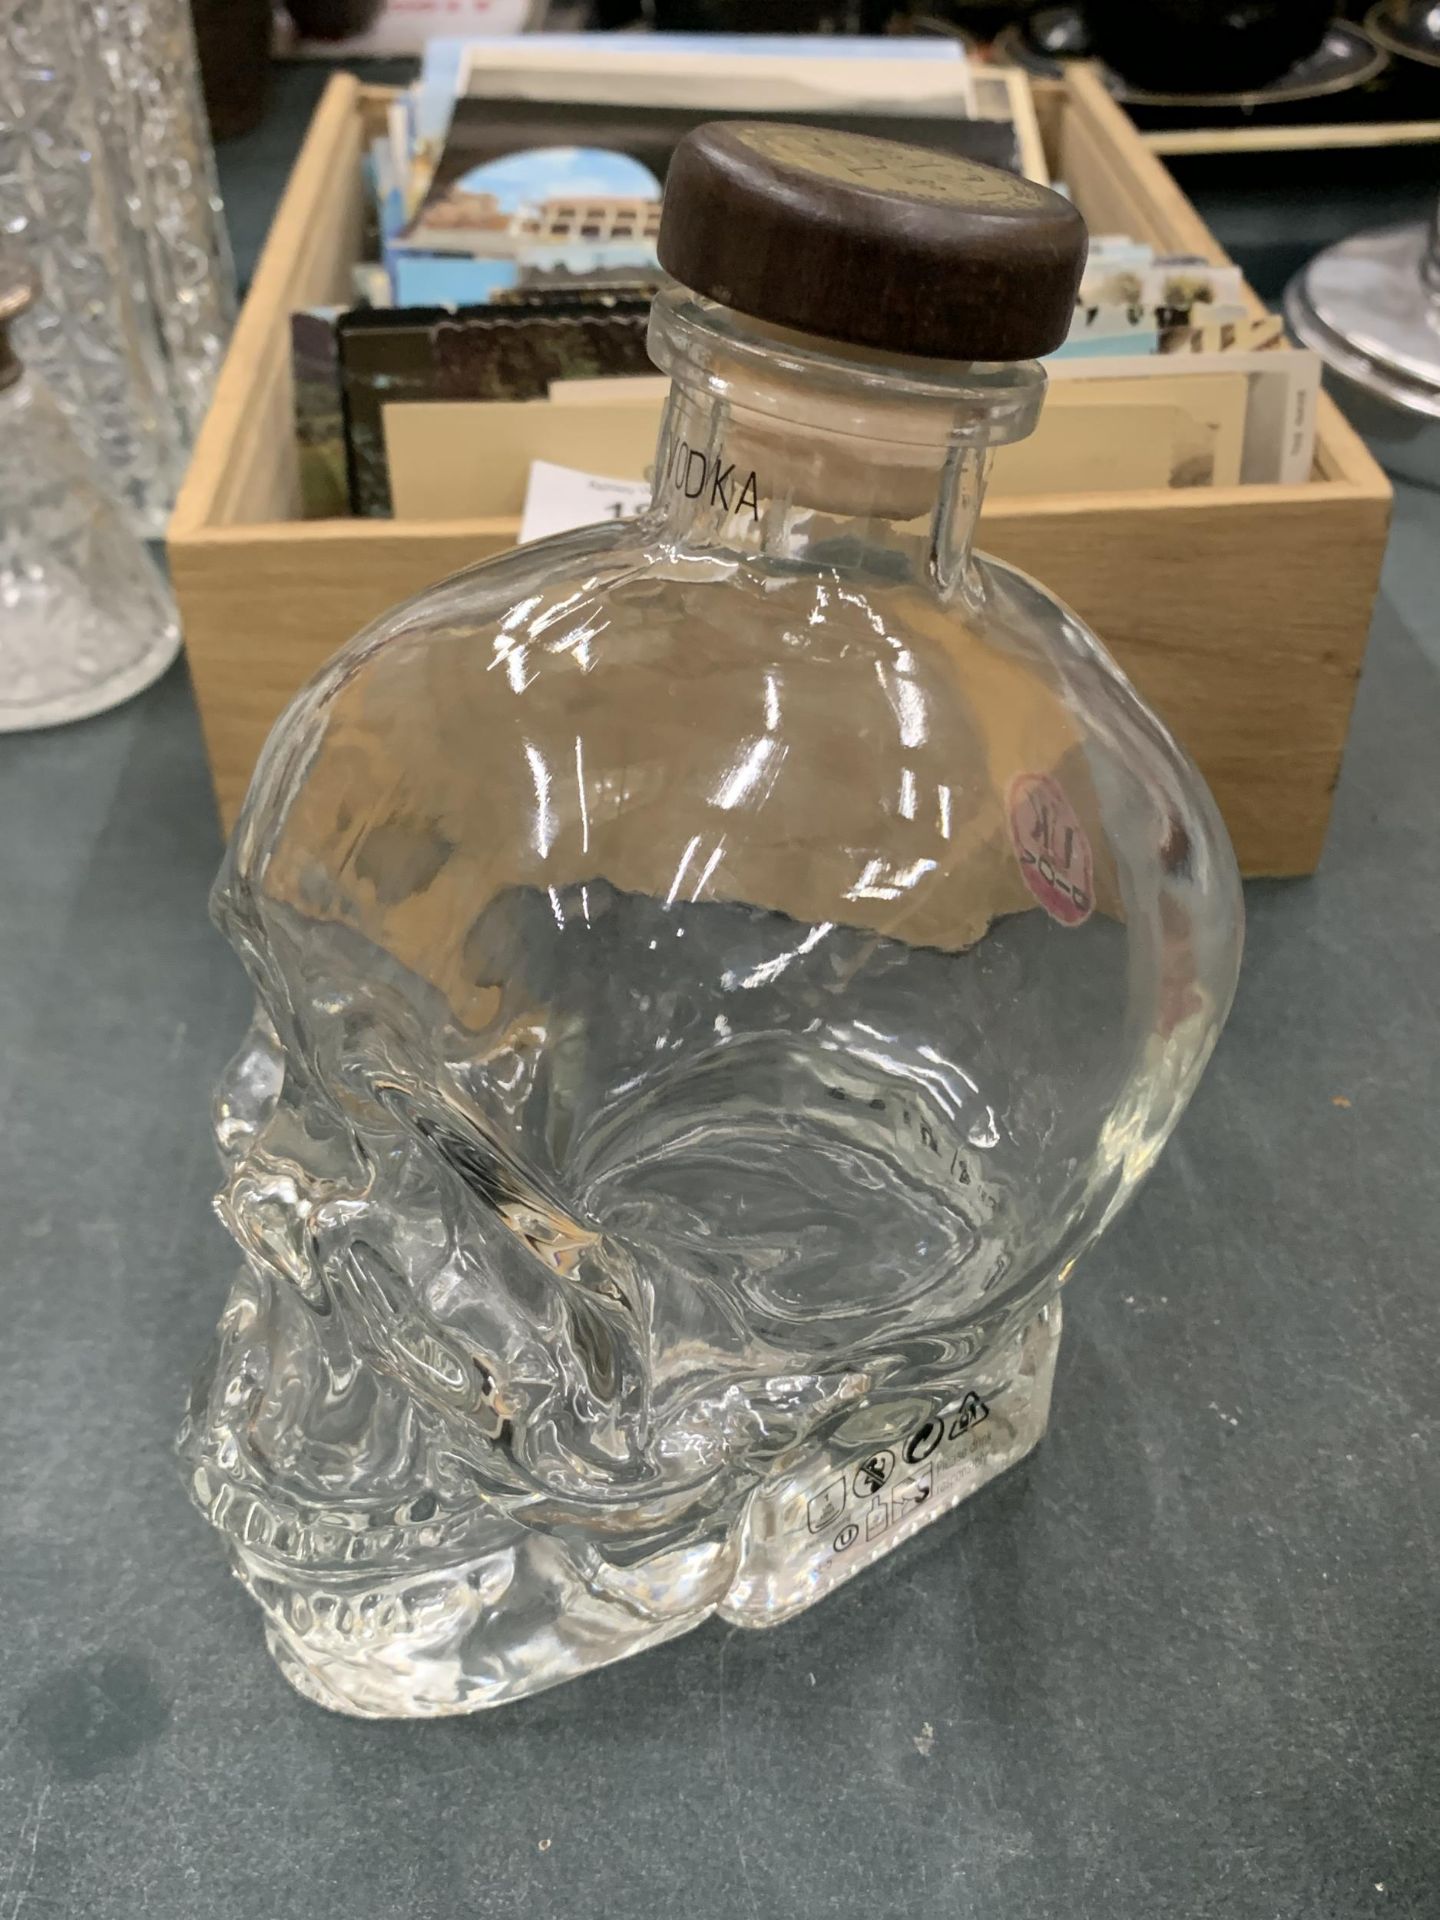 A CRYSTAL HEAD DOUBLE THICKNESS GLASS SKULL, HEIGHT 17CM